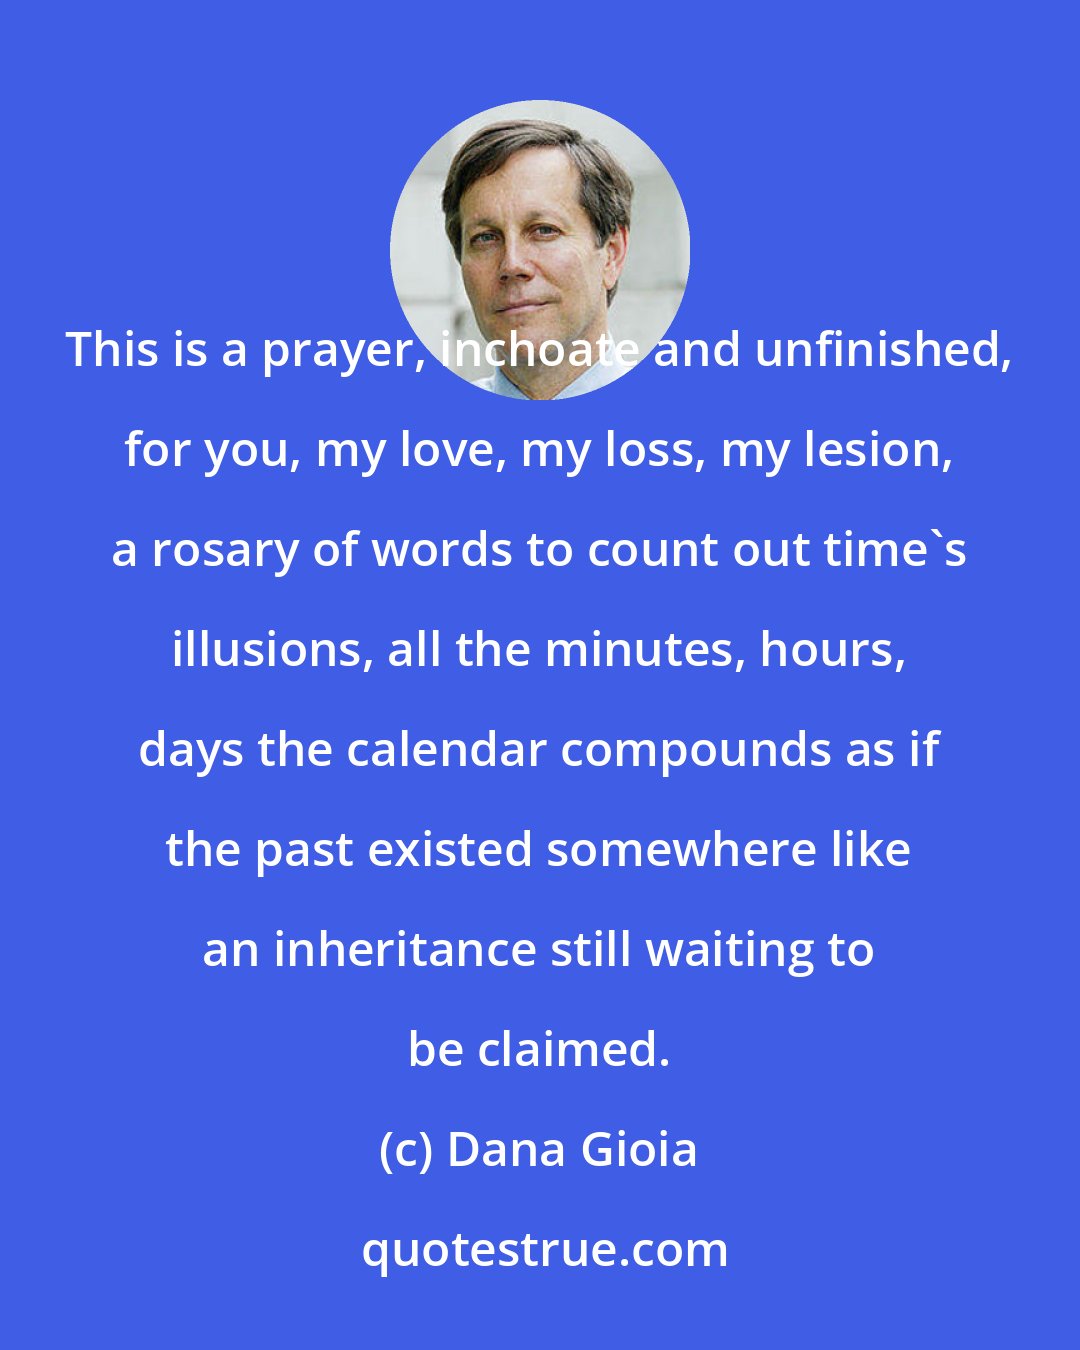 Dana Gioia: This is a prayer, inchoate and unfinished, for you, my love, my loss, my lesion, a rosary of words to count out time's illusions, all the minutes, hours, days the calendar compounds as if the past existed somewhere like an inheritance still waiting to be claimed.